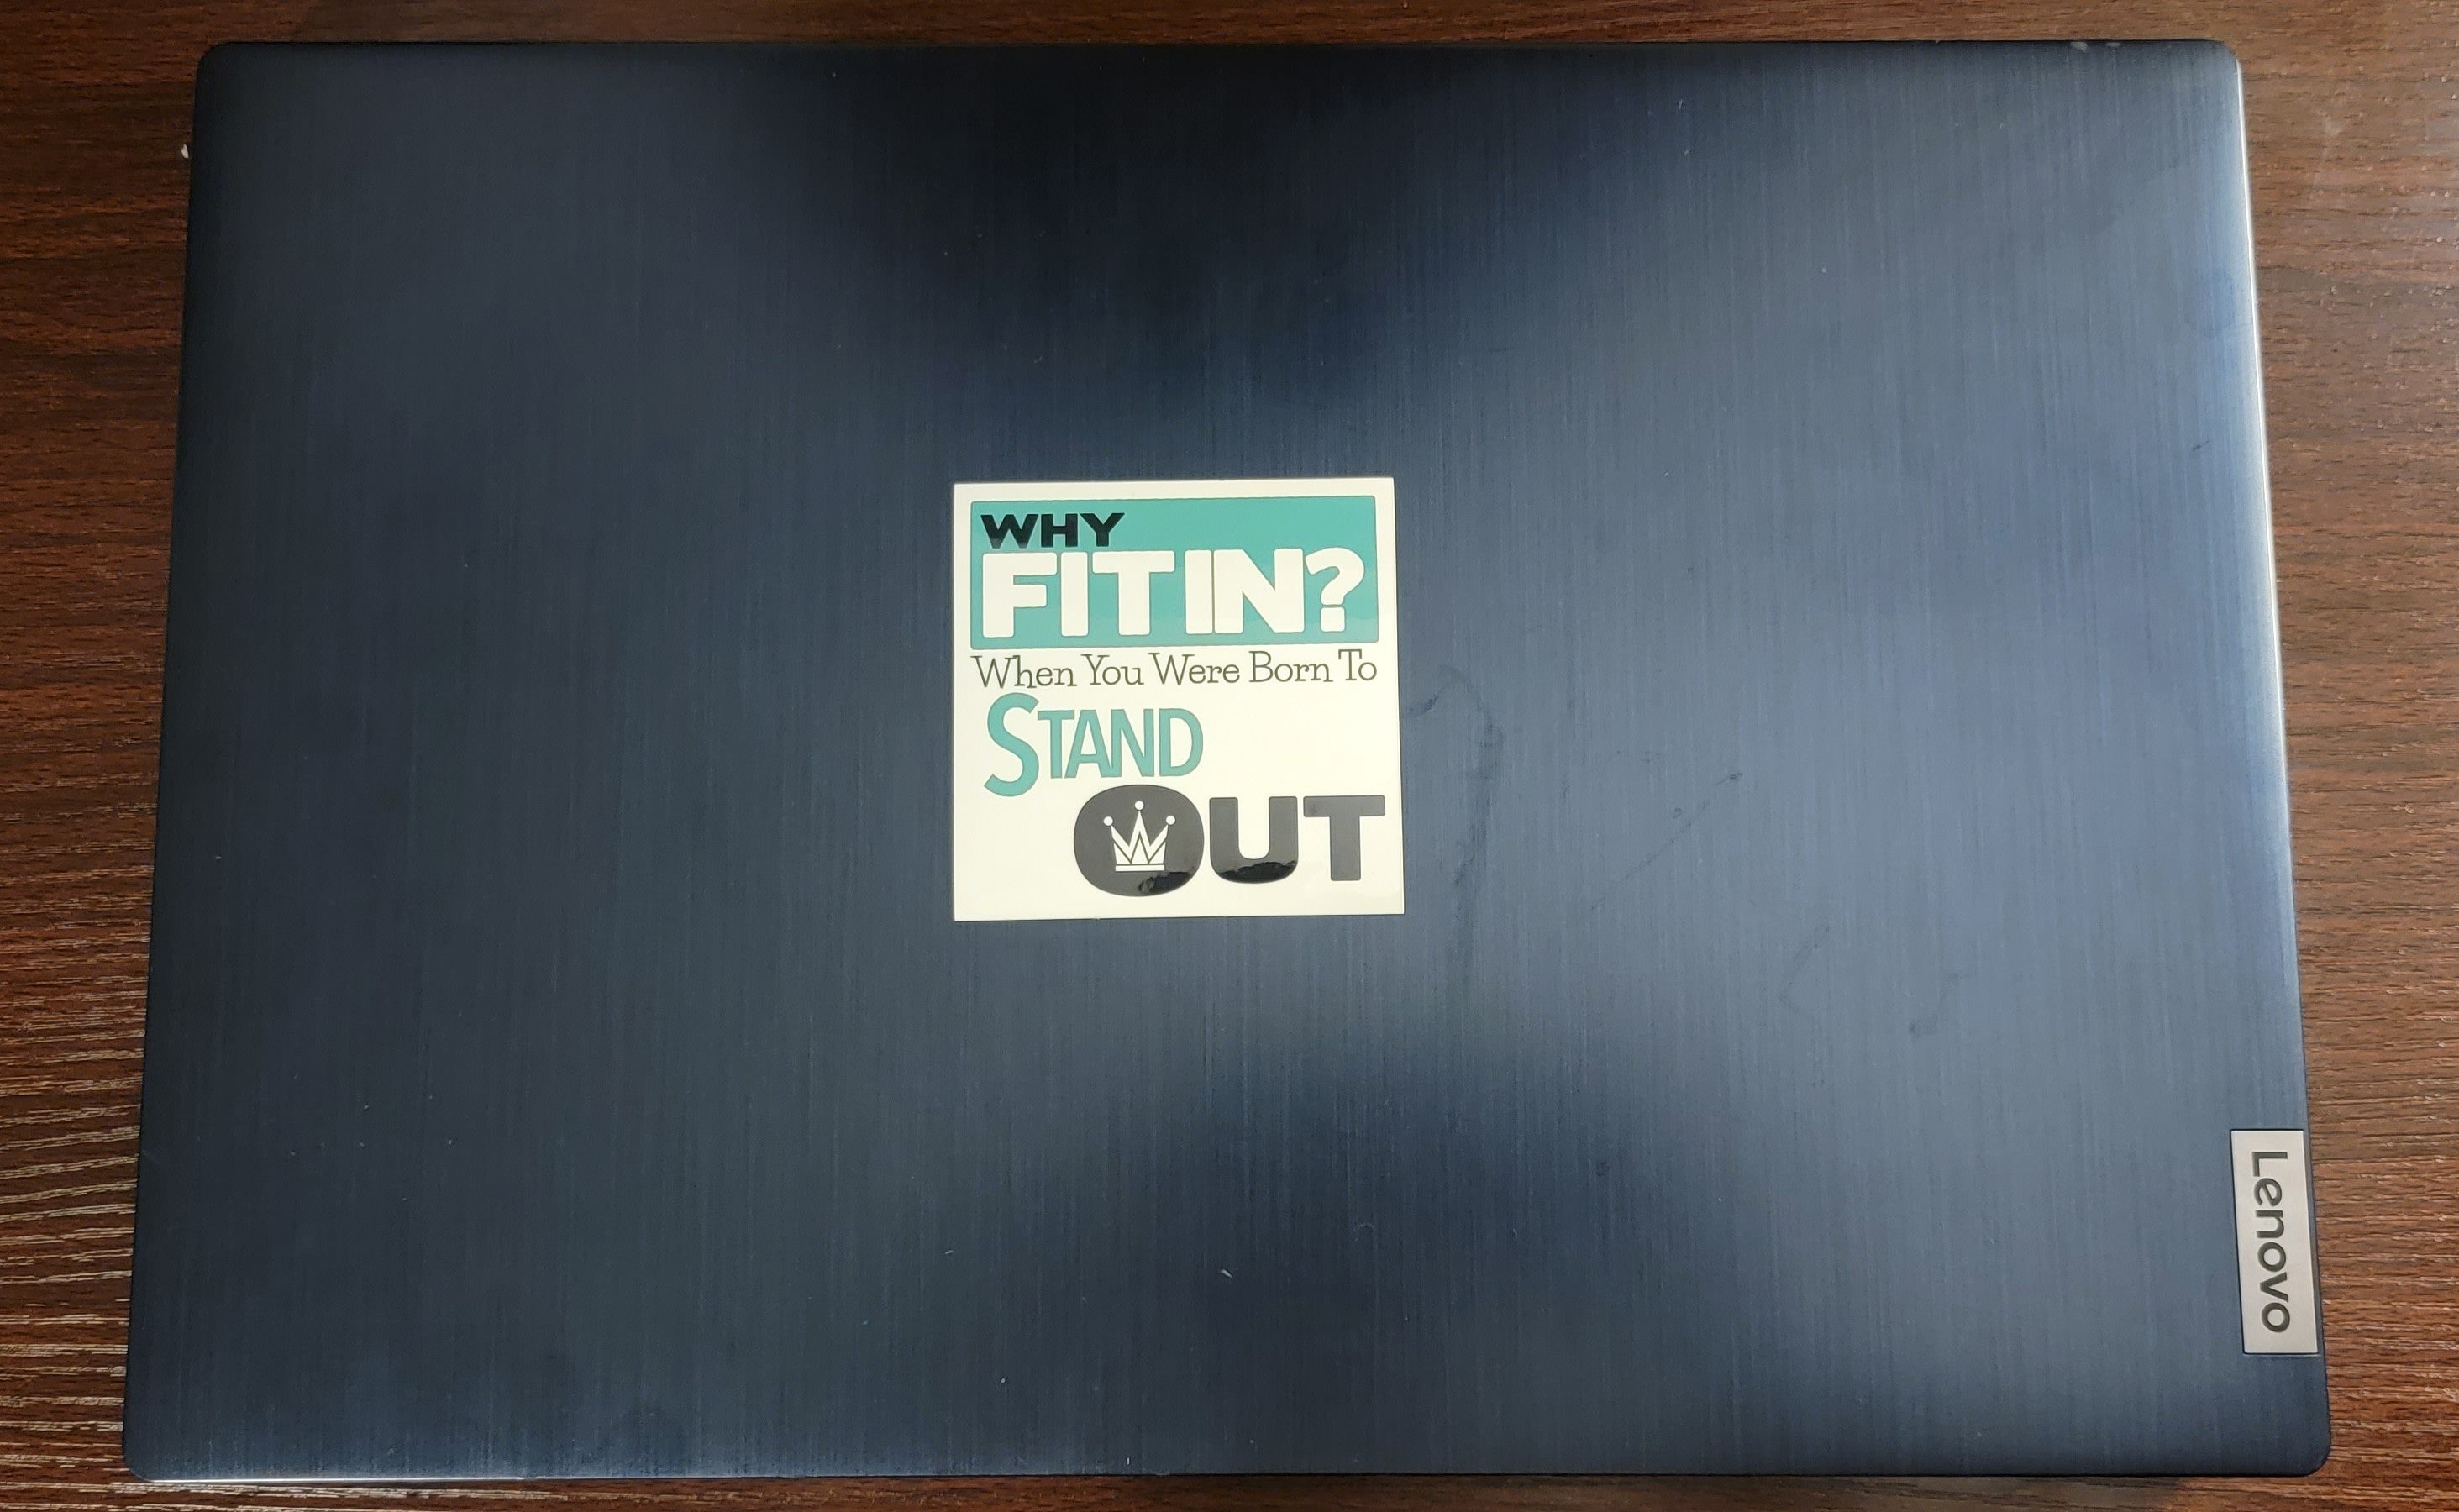 Why Fit In? When You Were Born to Stand Out - Vinyl Decal